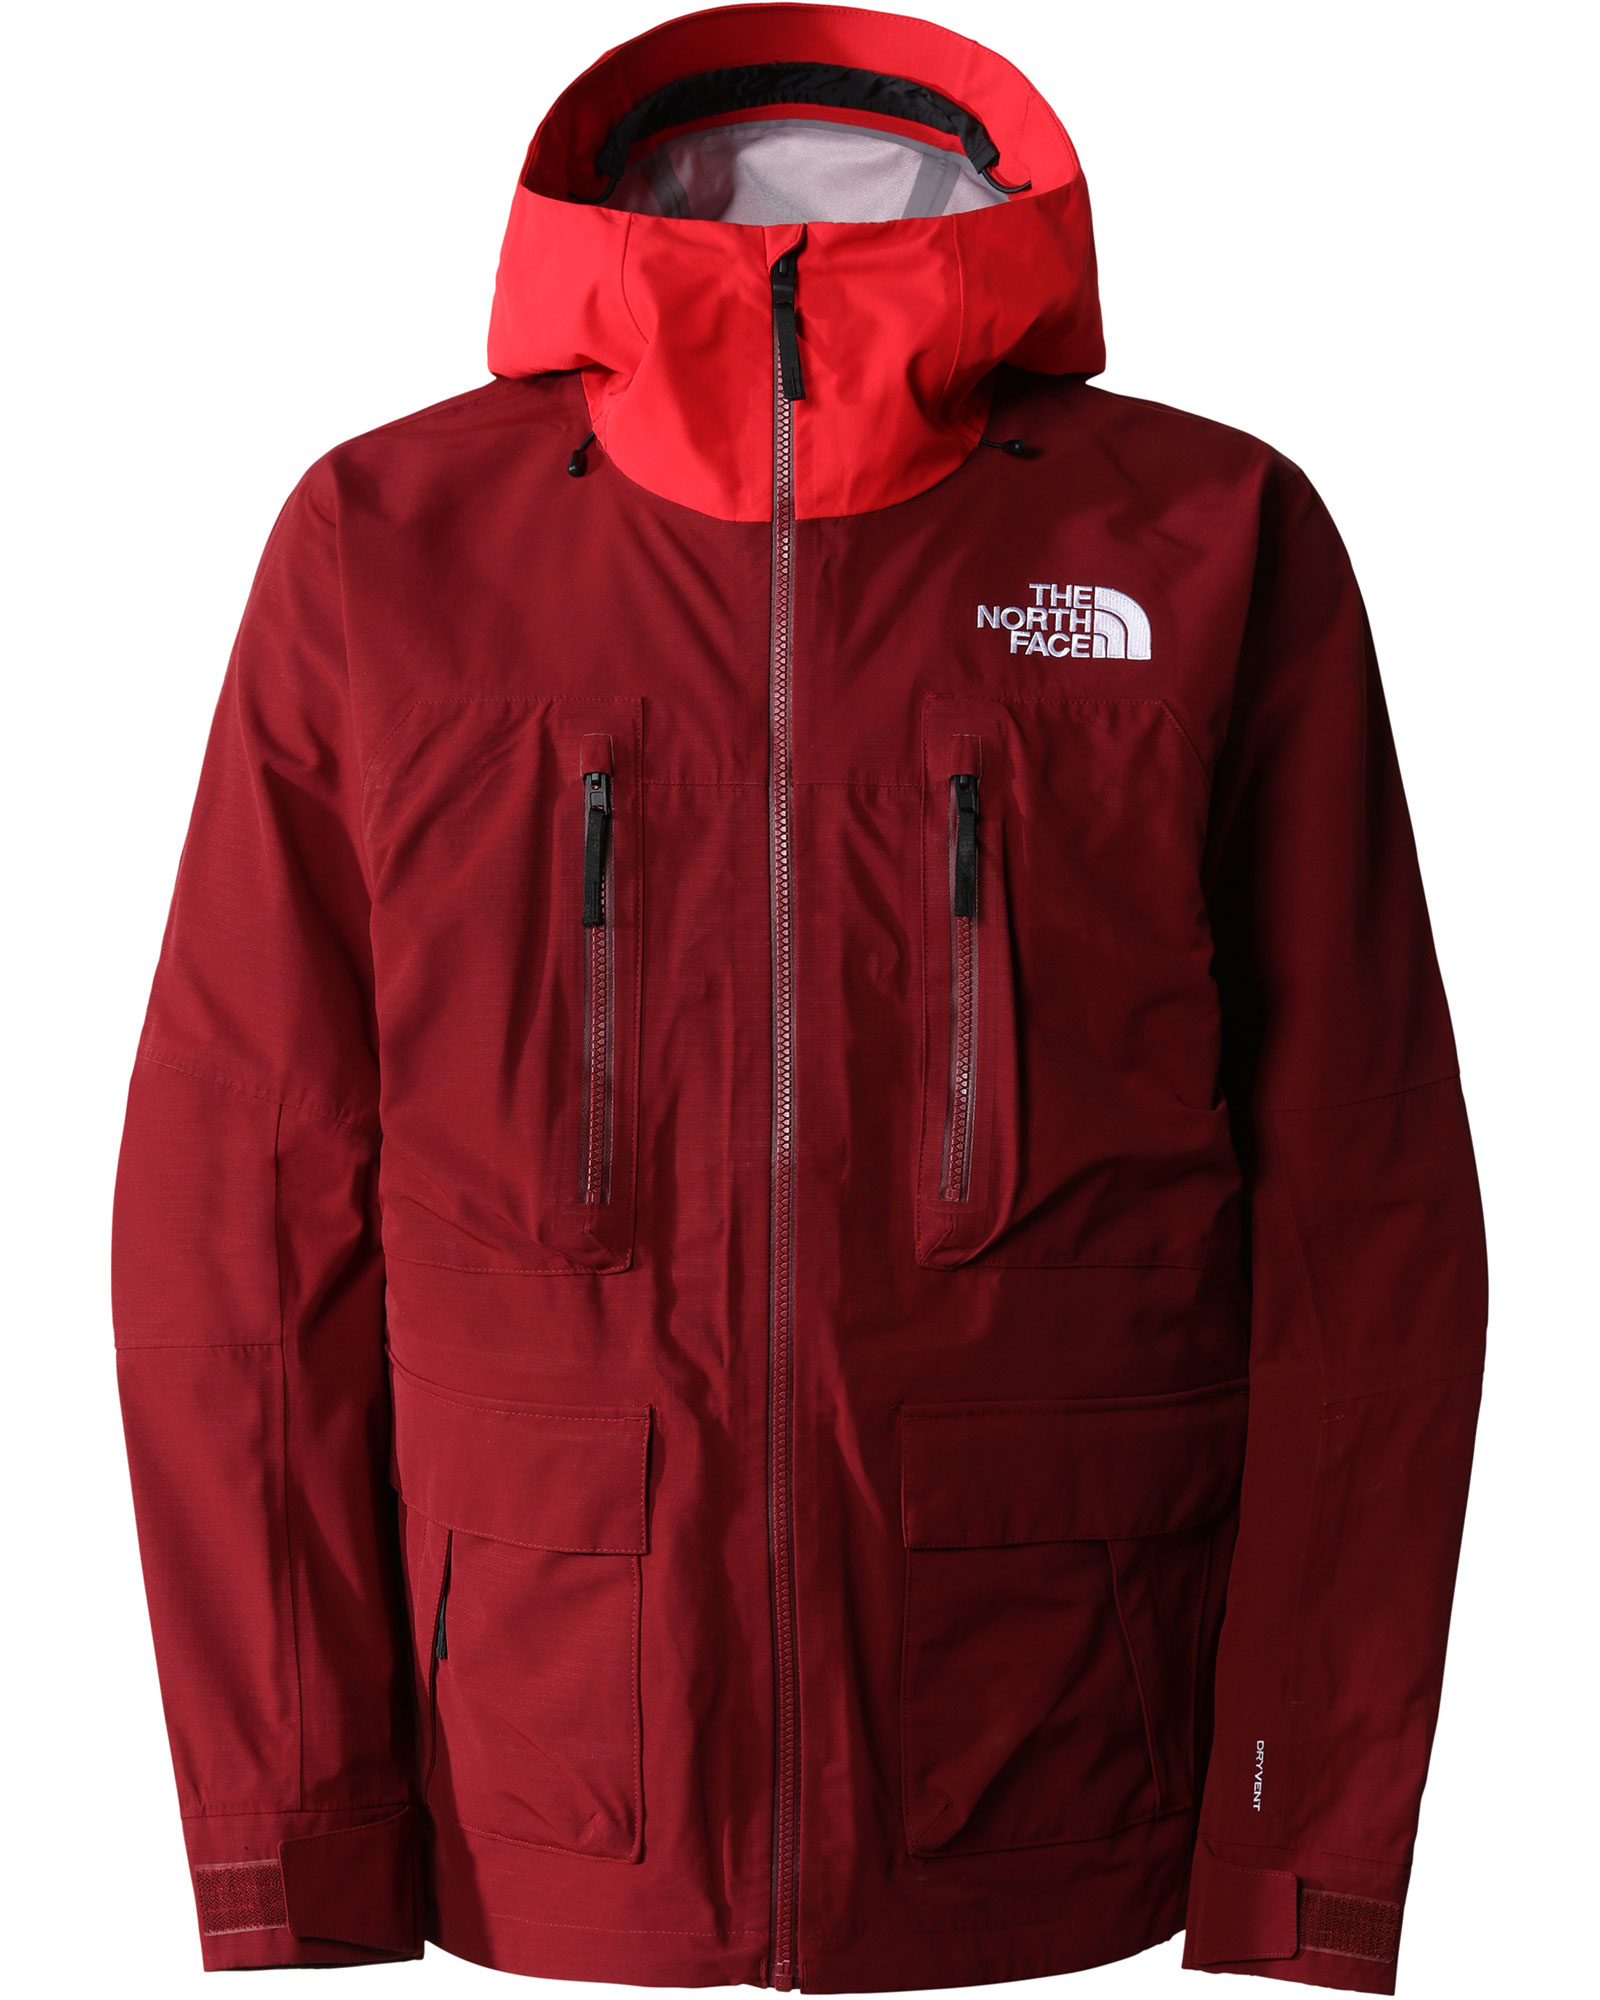 Product image of The North Face Dragline Men's Jacket